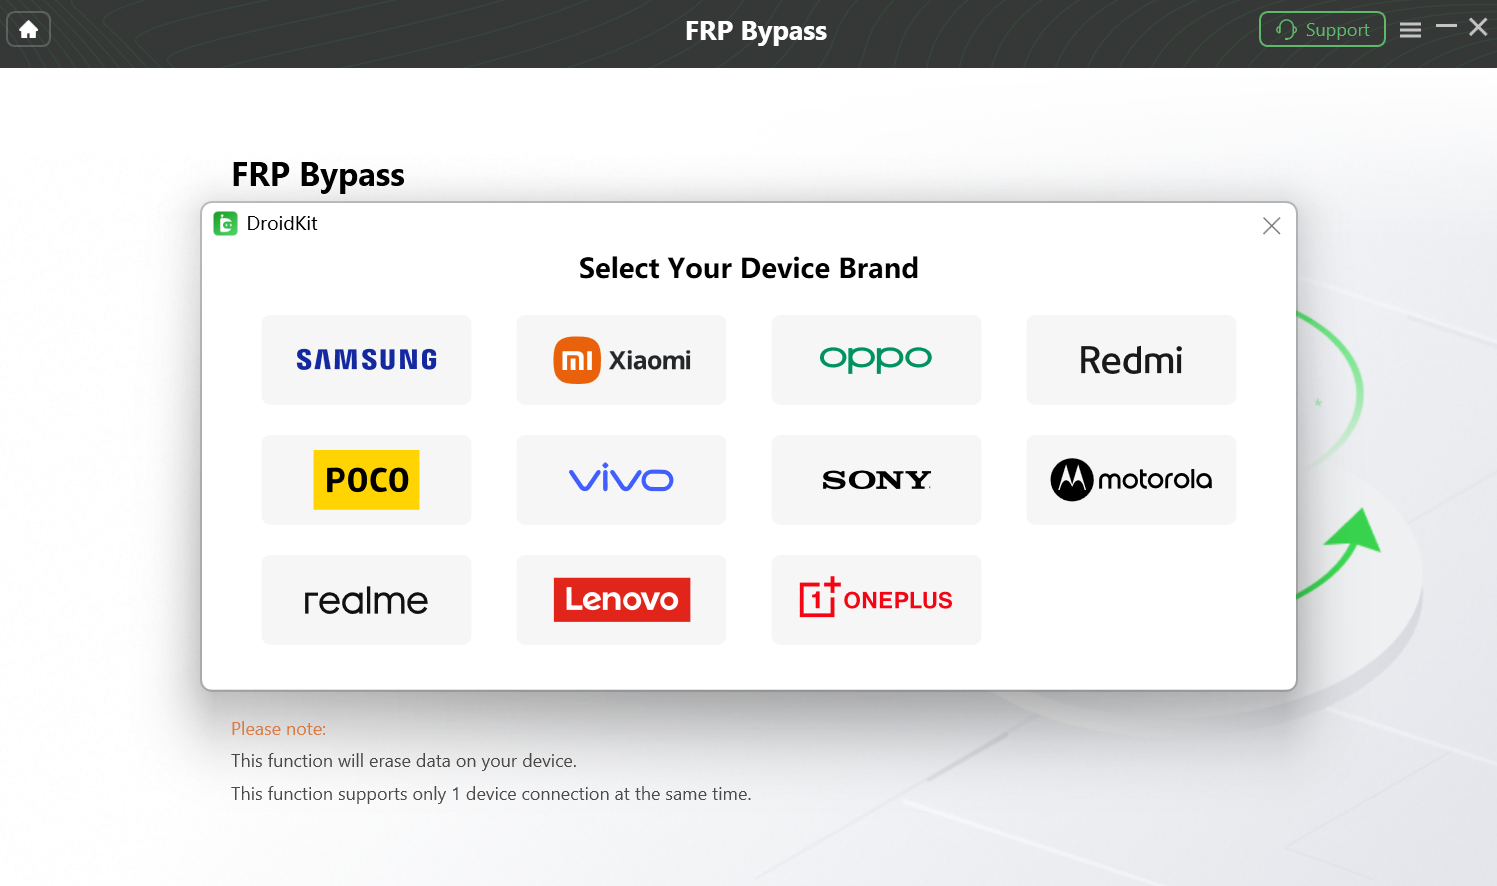 Select Your Device Brand